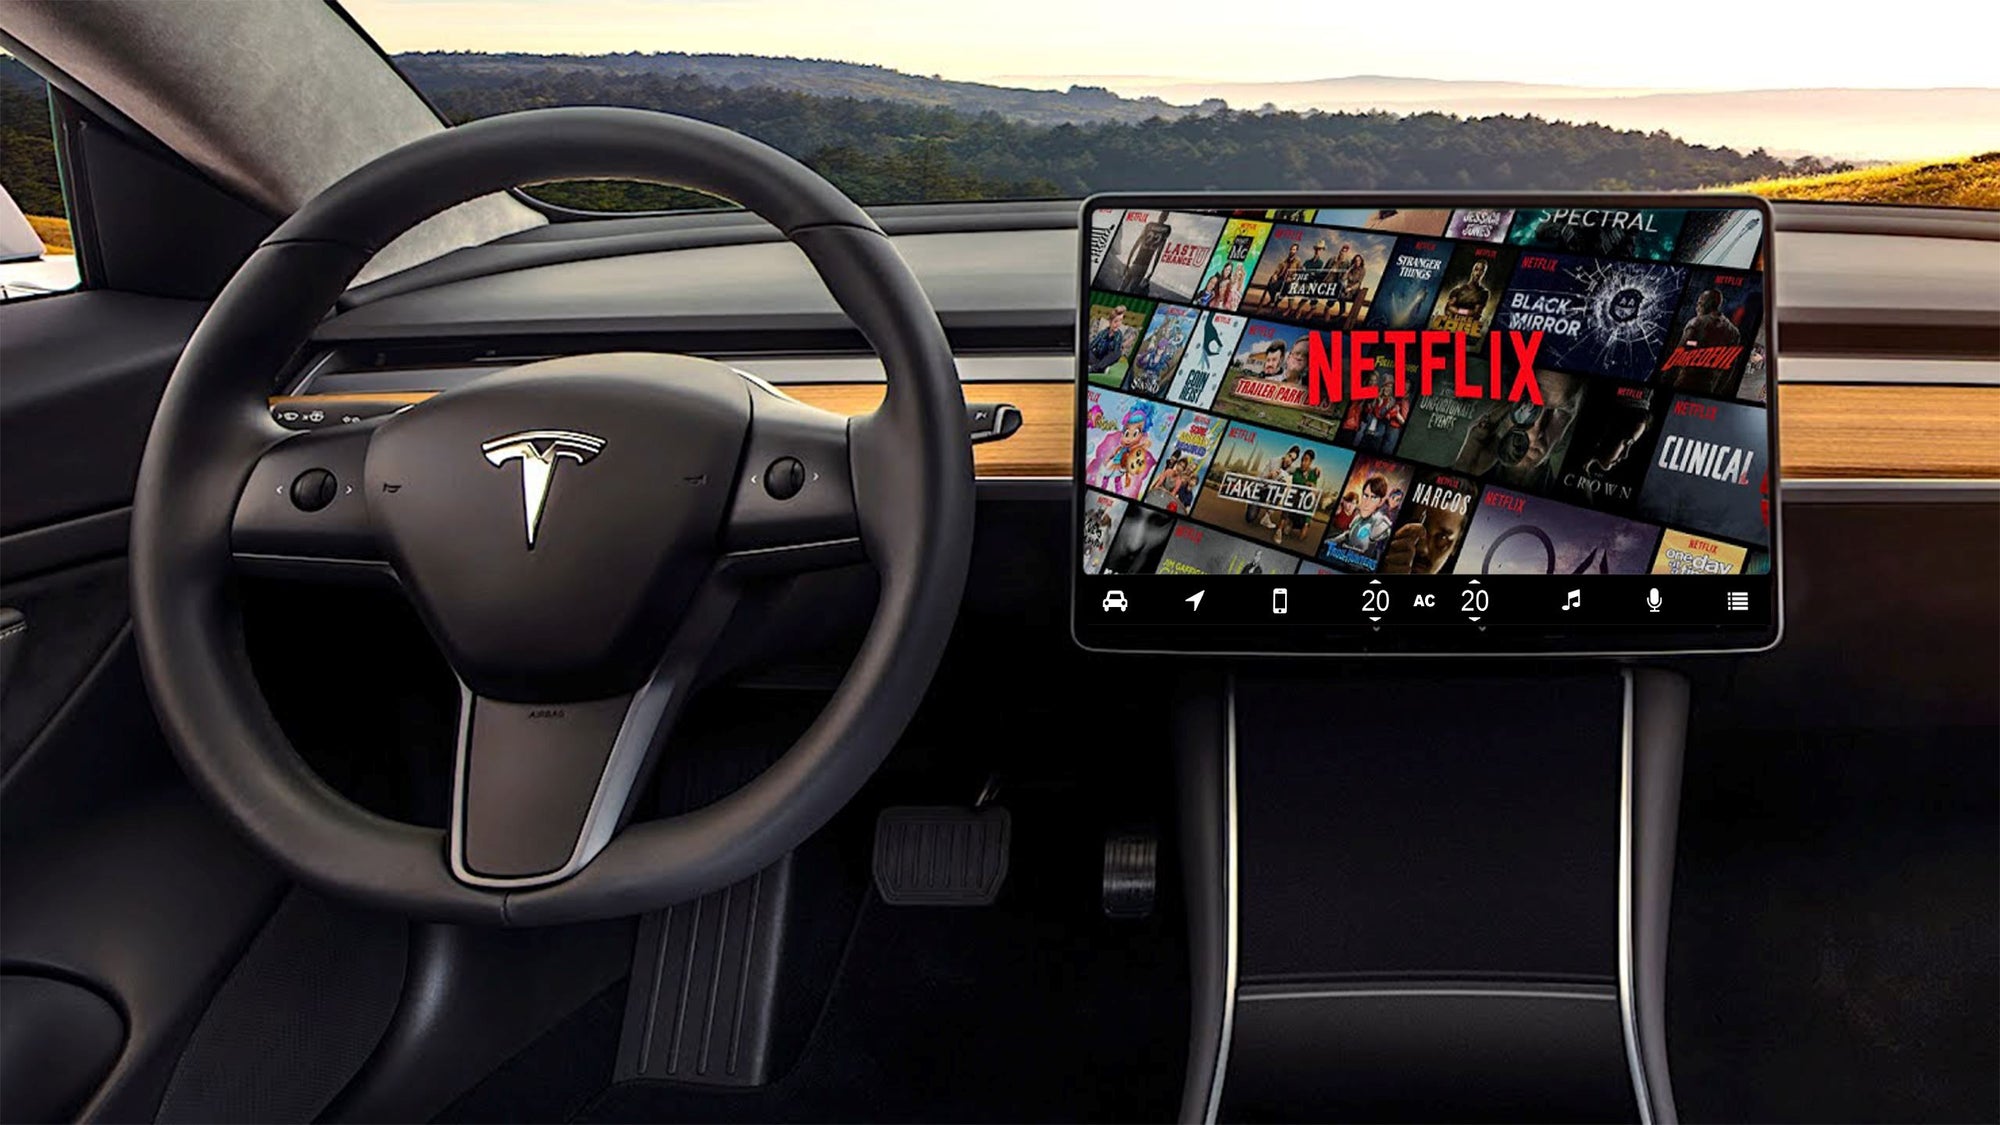 Netflix's Password Sharing Crackdown Sparks Tesla Outrage - But Not for Long!